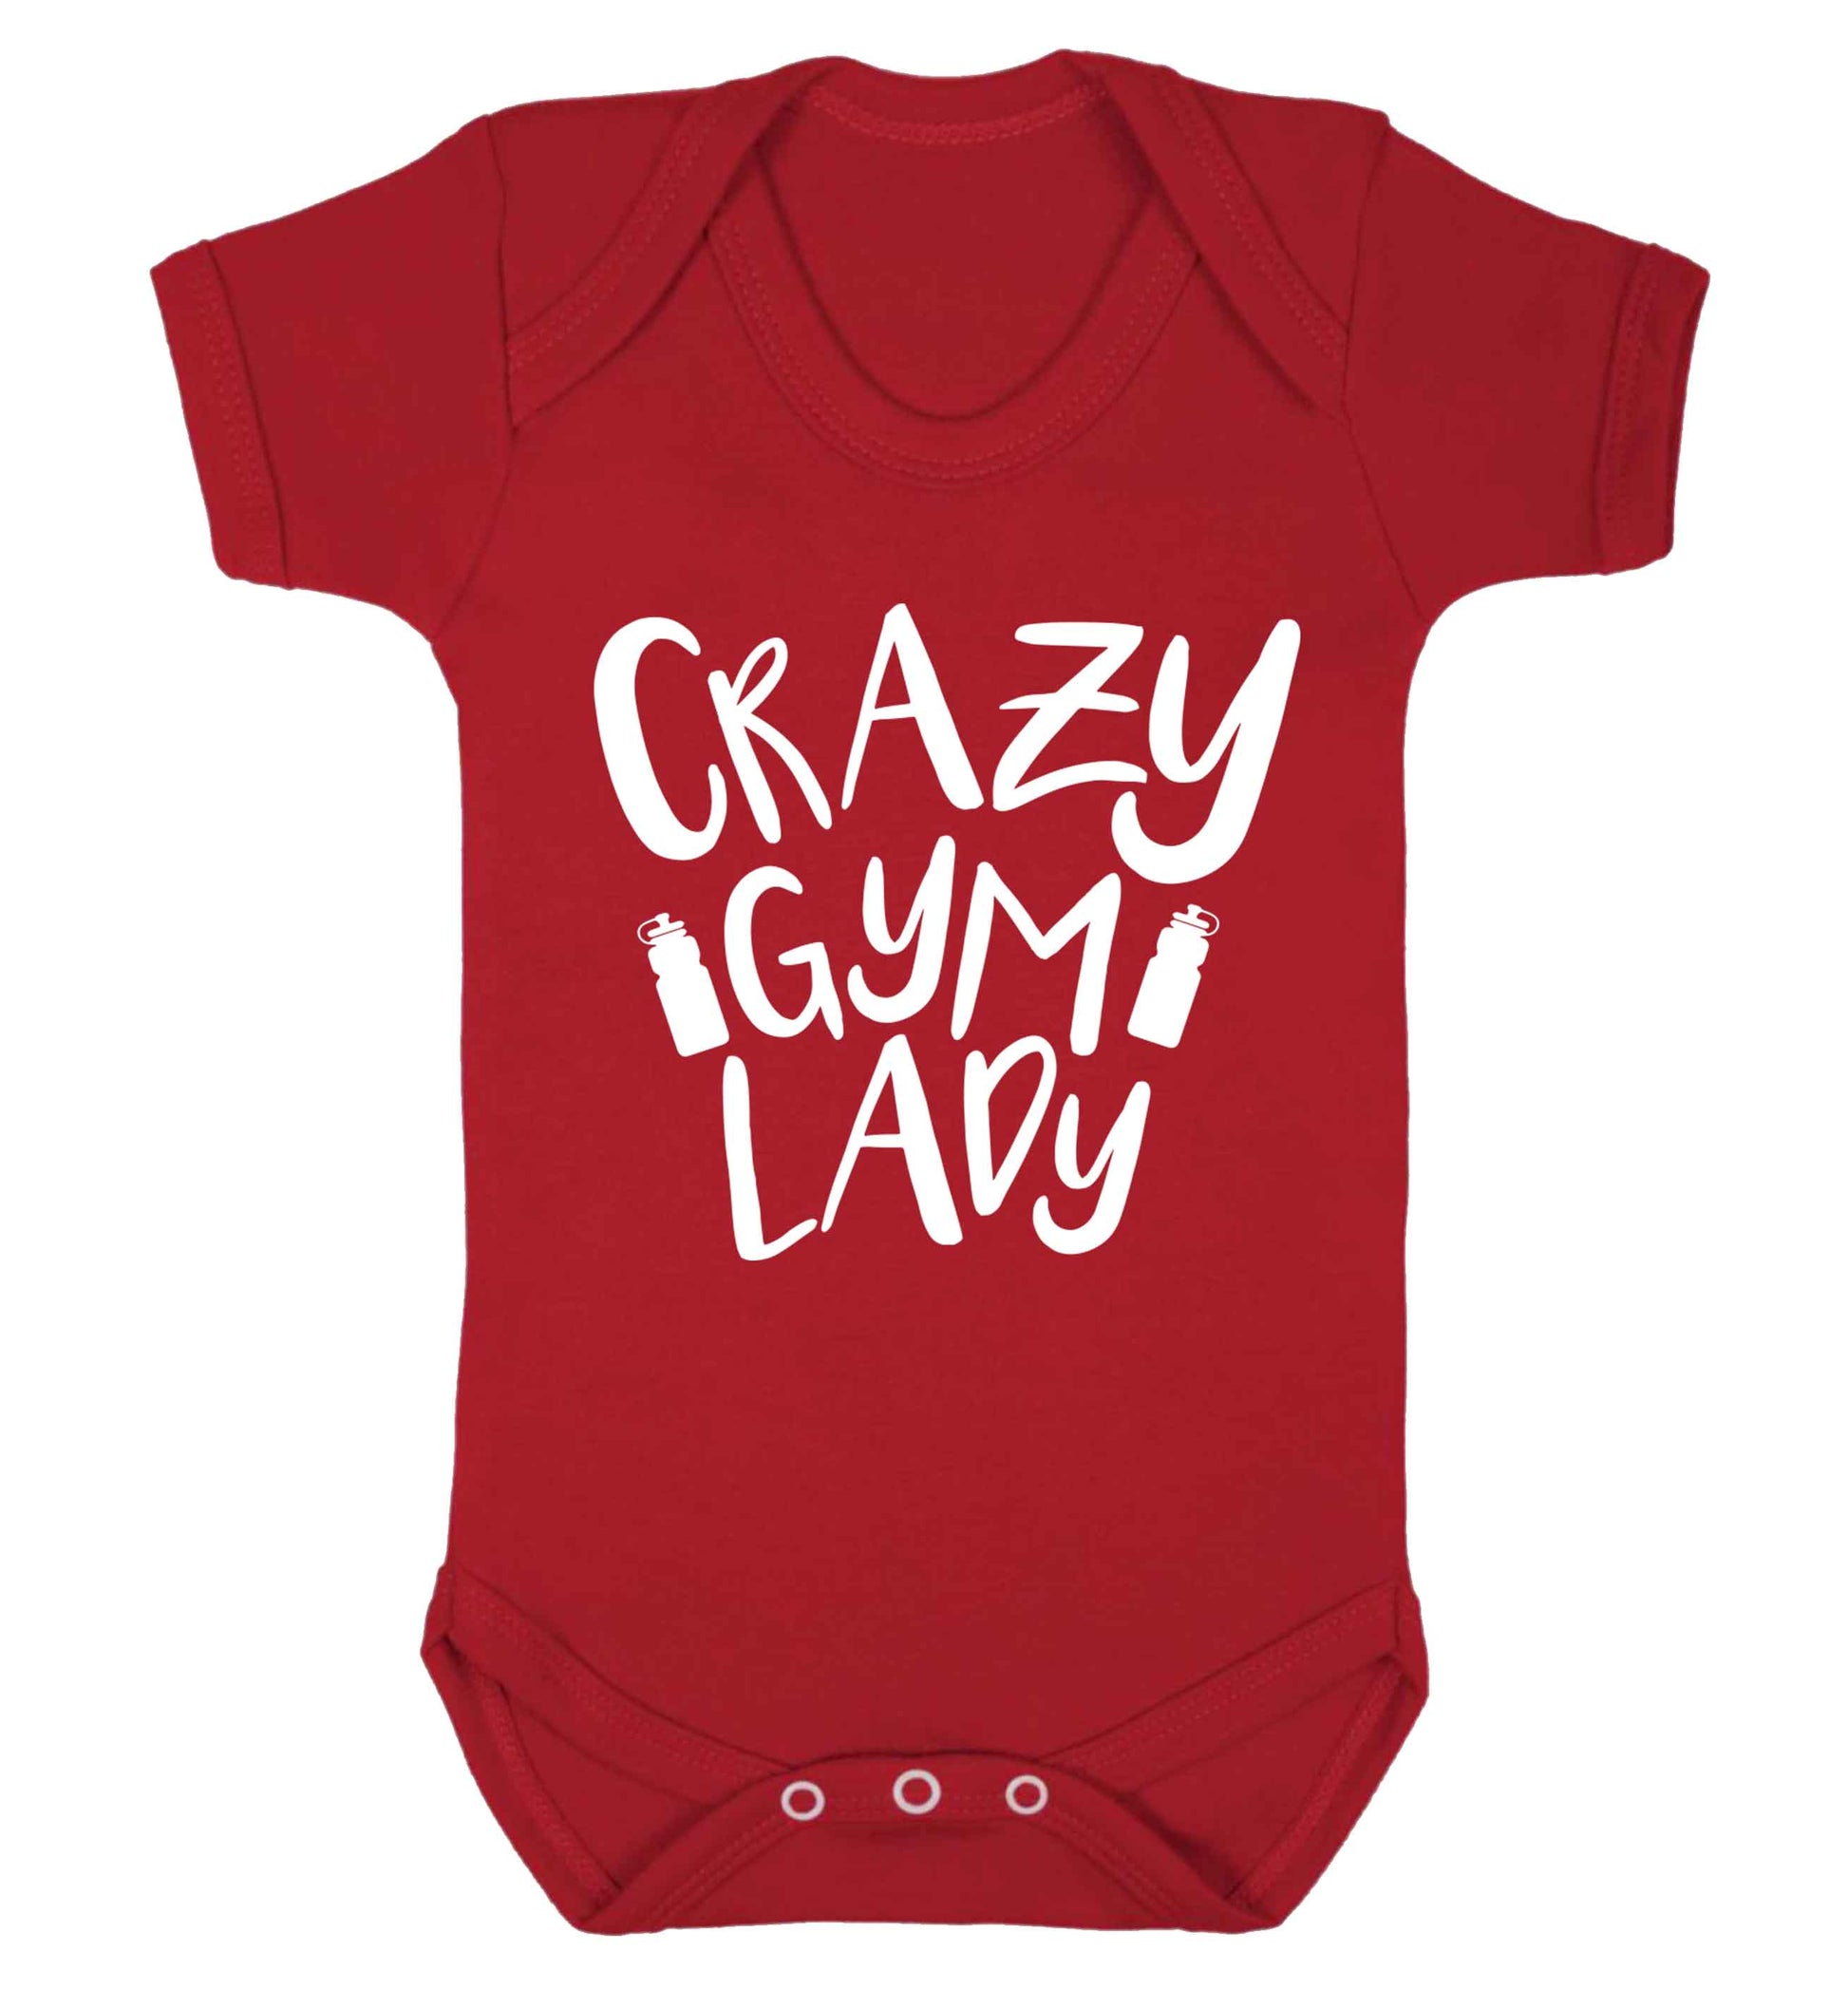 Crazy gym lady Baby Vest red 18-24 months